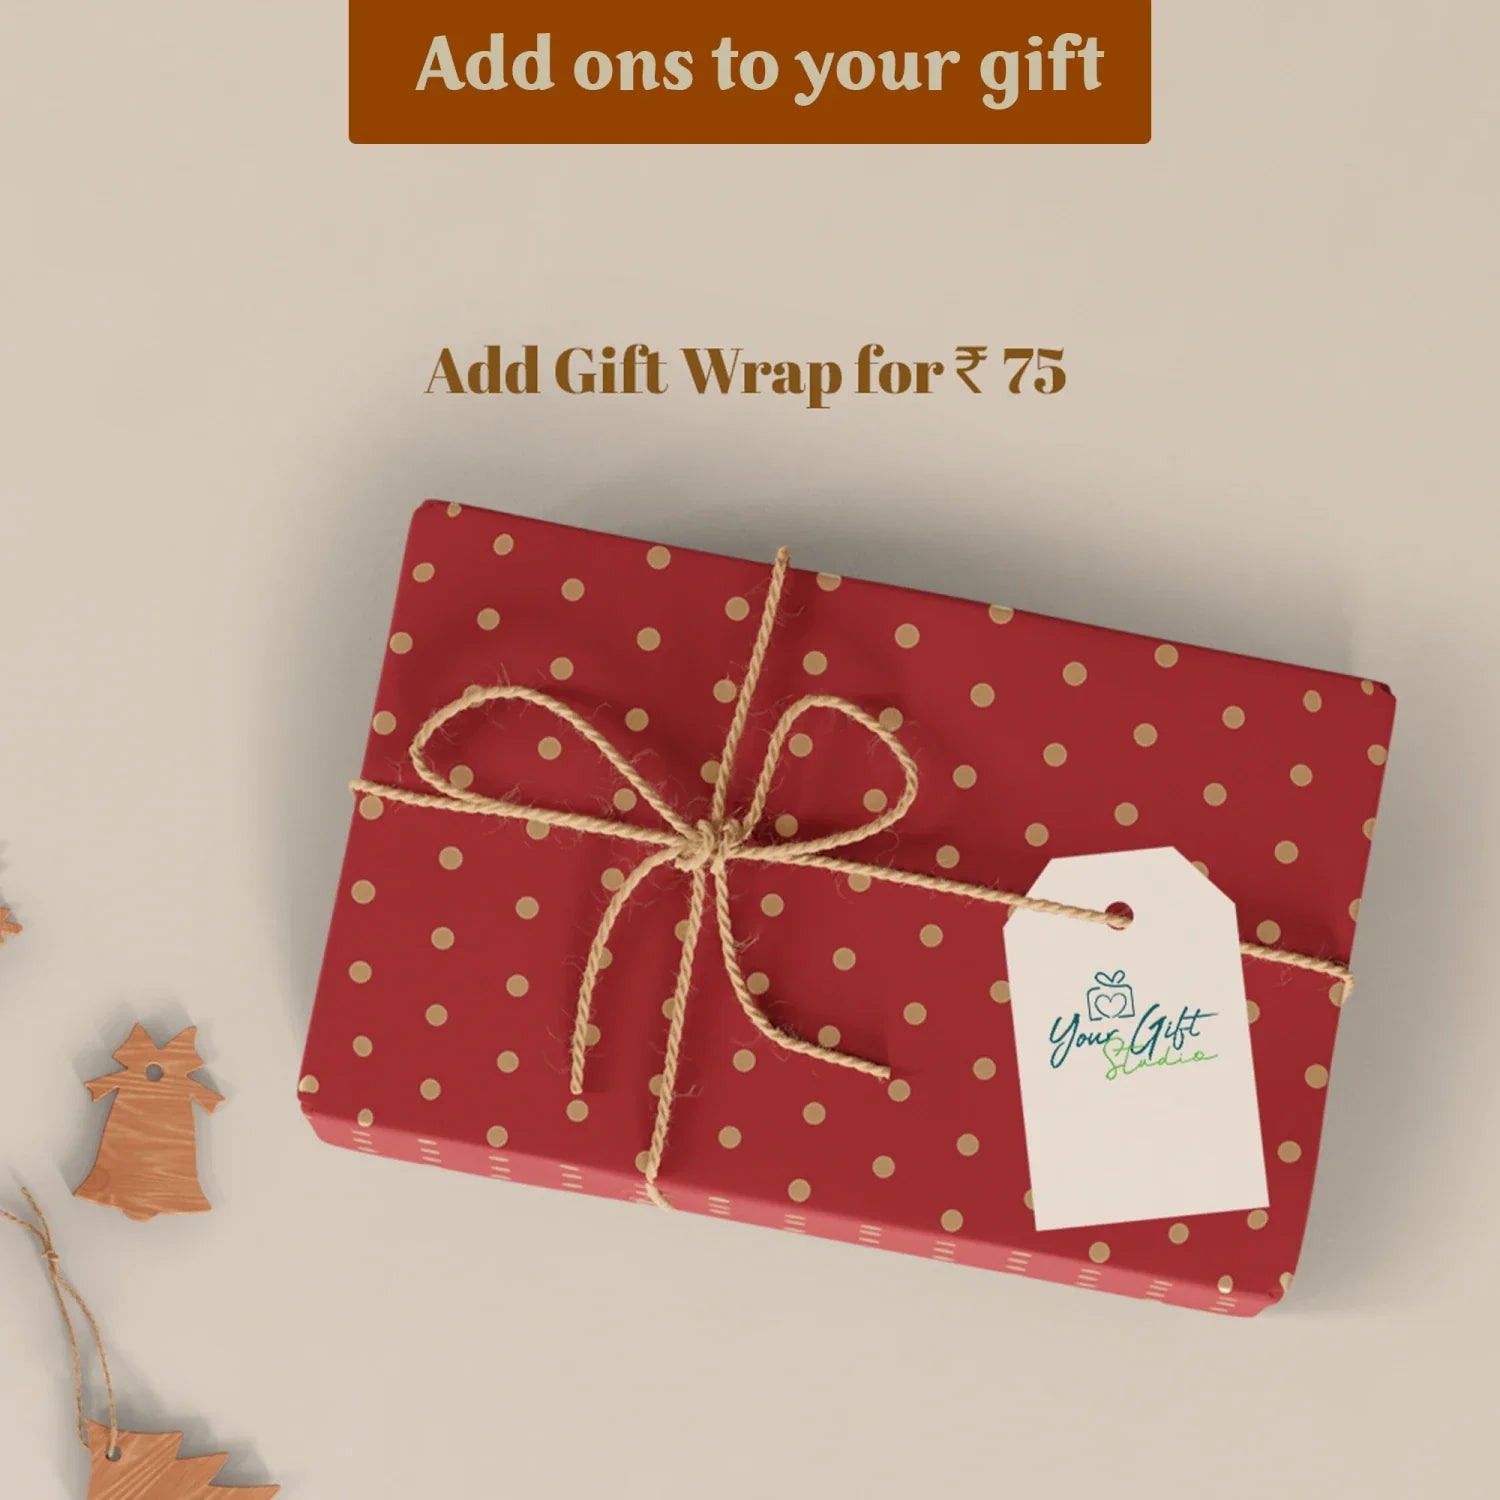 "Wrap this gift for unmatched elegance and decorative appearance. Make your partner more eager and thrilled to unwrap the surprise  "